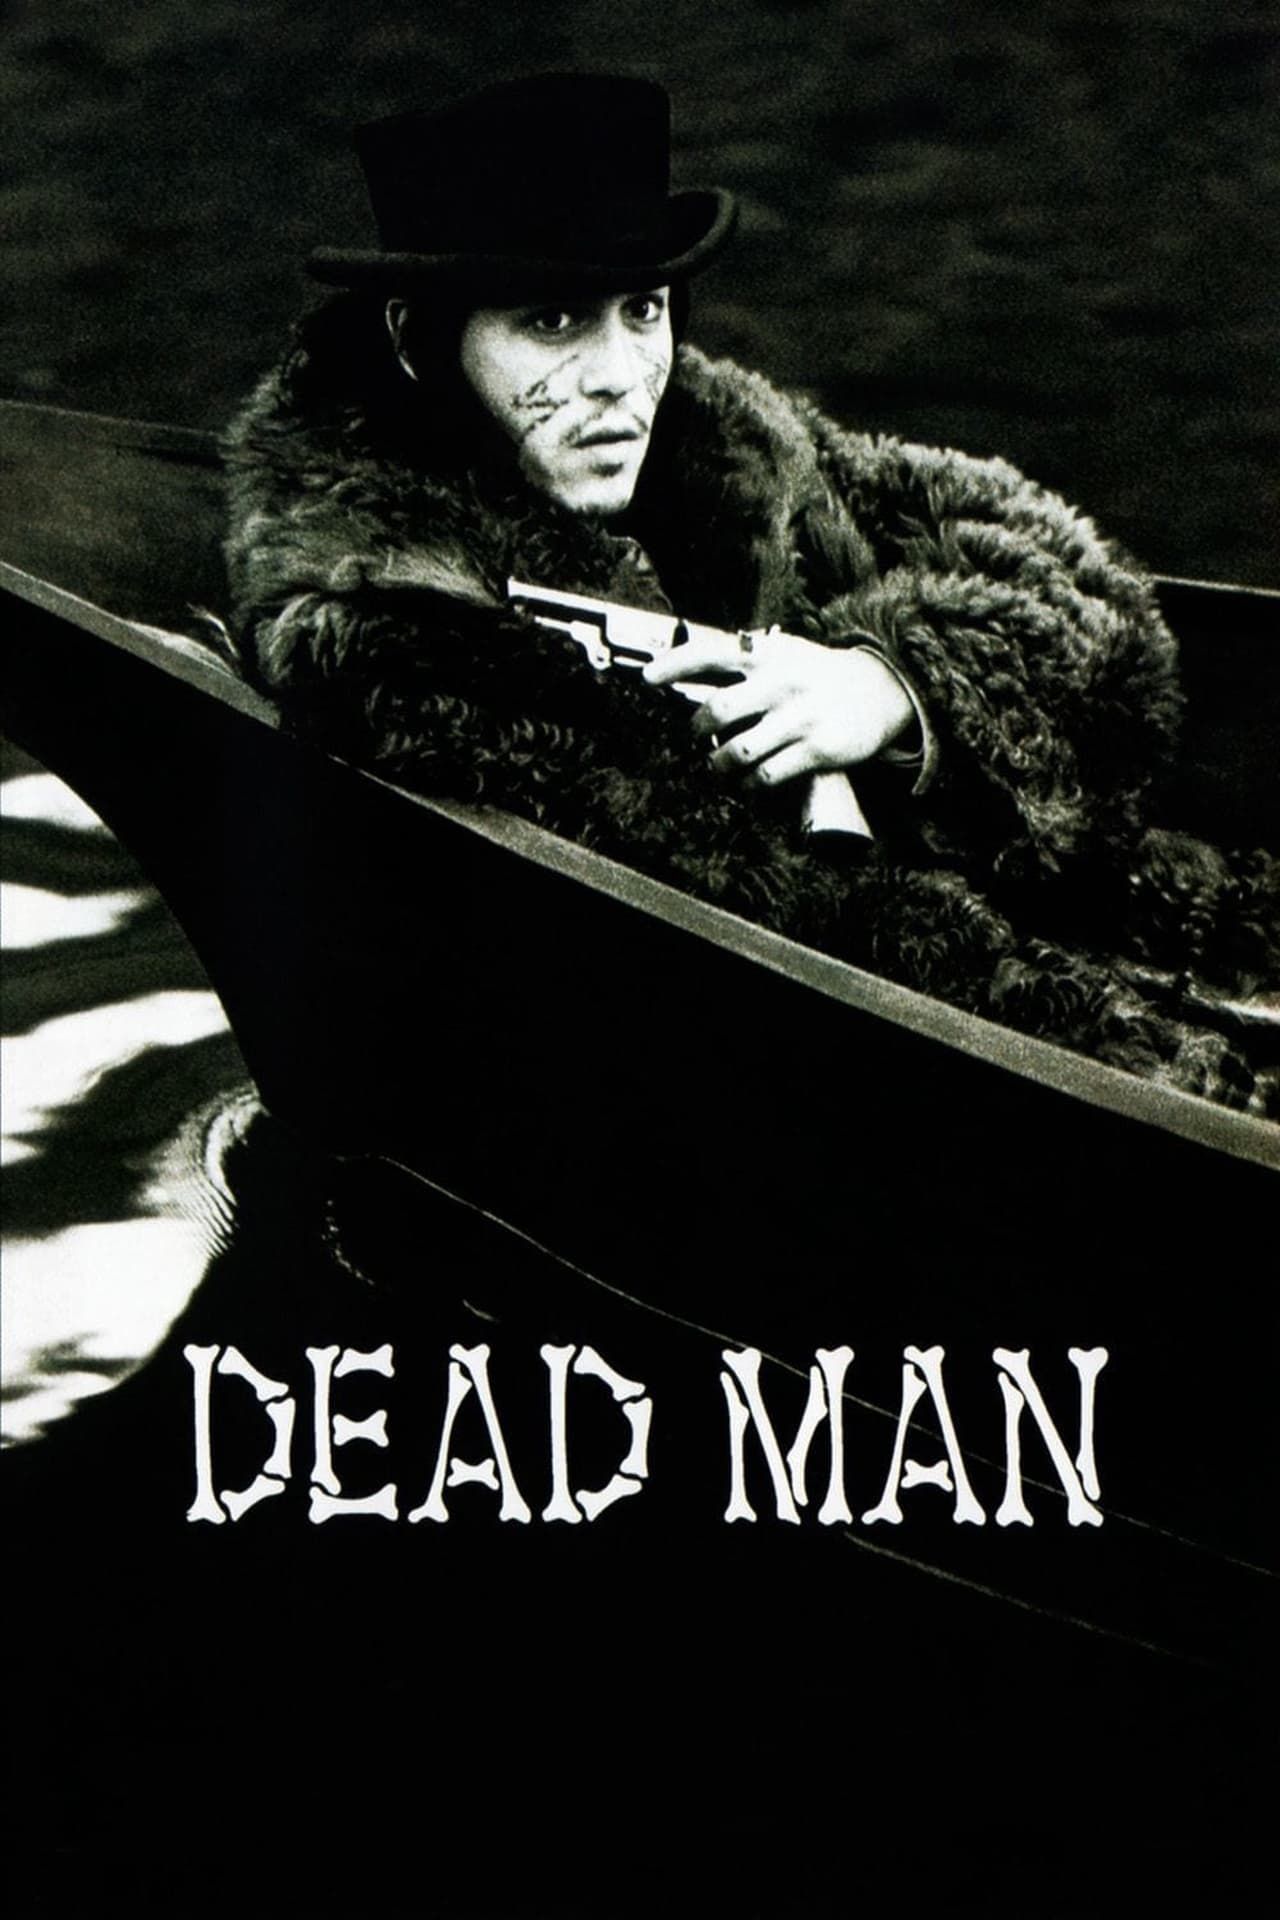 Dead Man Movie Poster Showing Johnny Depp in a Boat Holding a Gun